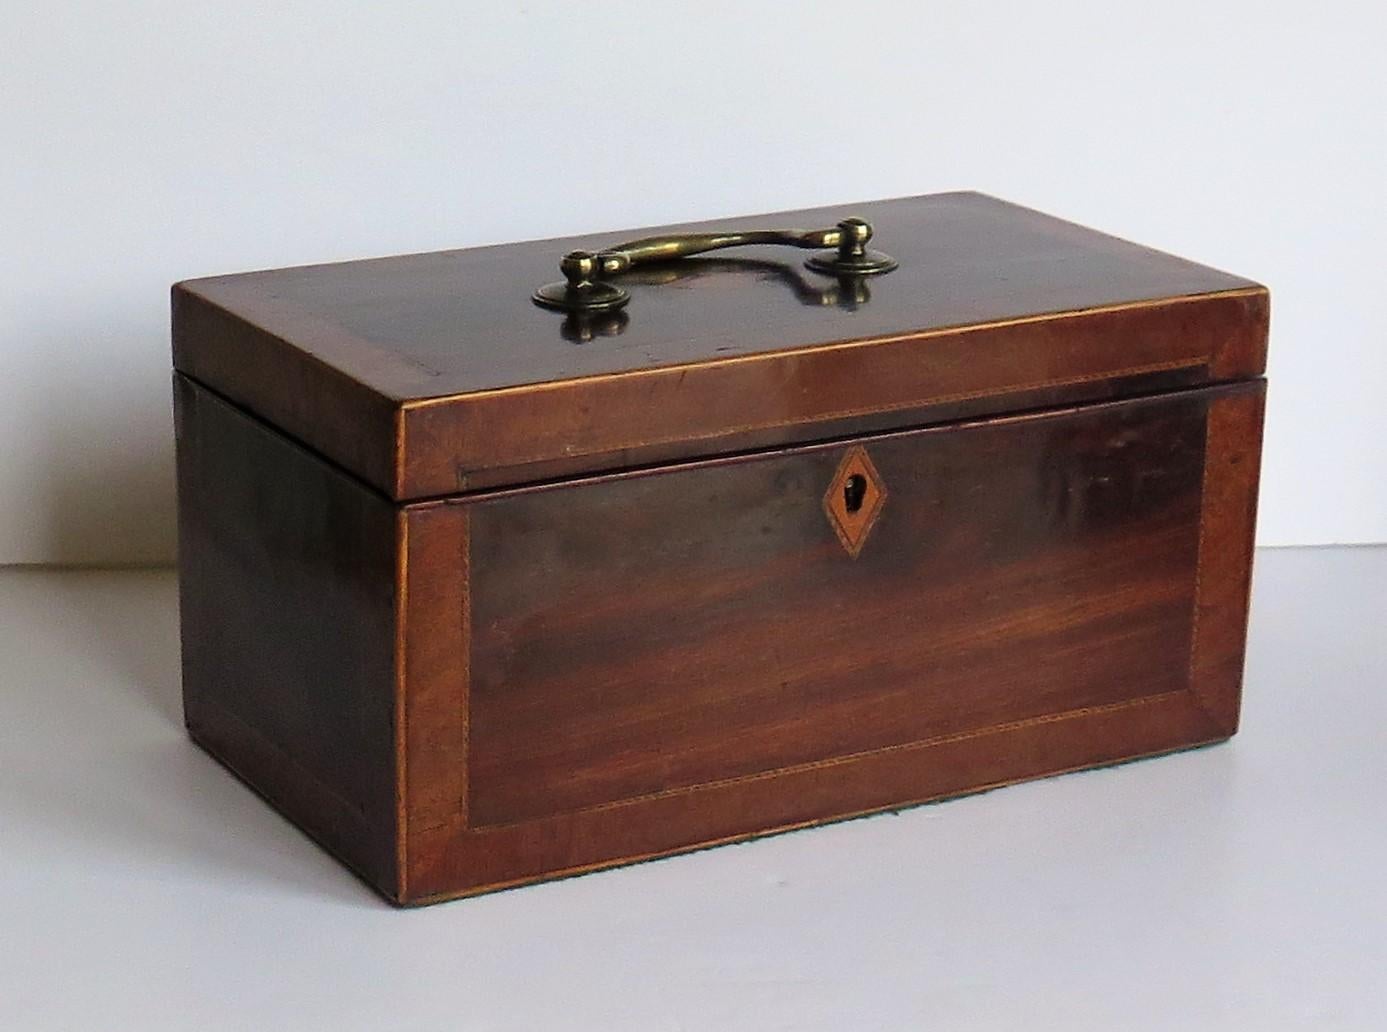 This is a very good quality English Georgian period box or document box with fine inlaid and cross banded detail, having a hinged lid with a brass swan neck handle, dating to the late 18th century, George 3rd period, circa 1780.

The box has a